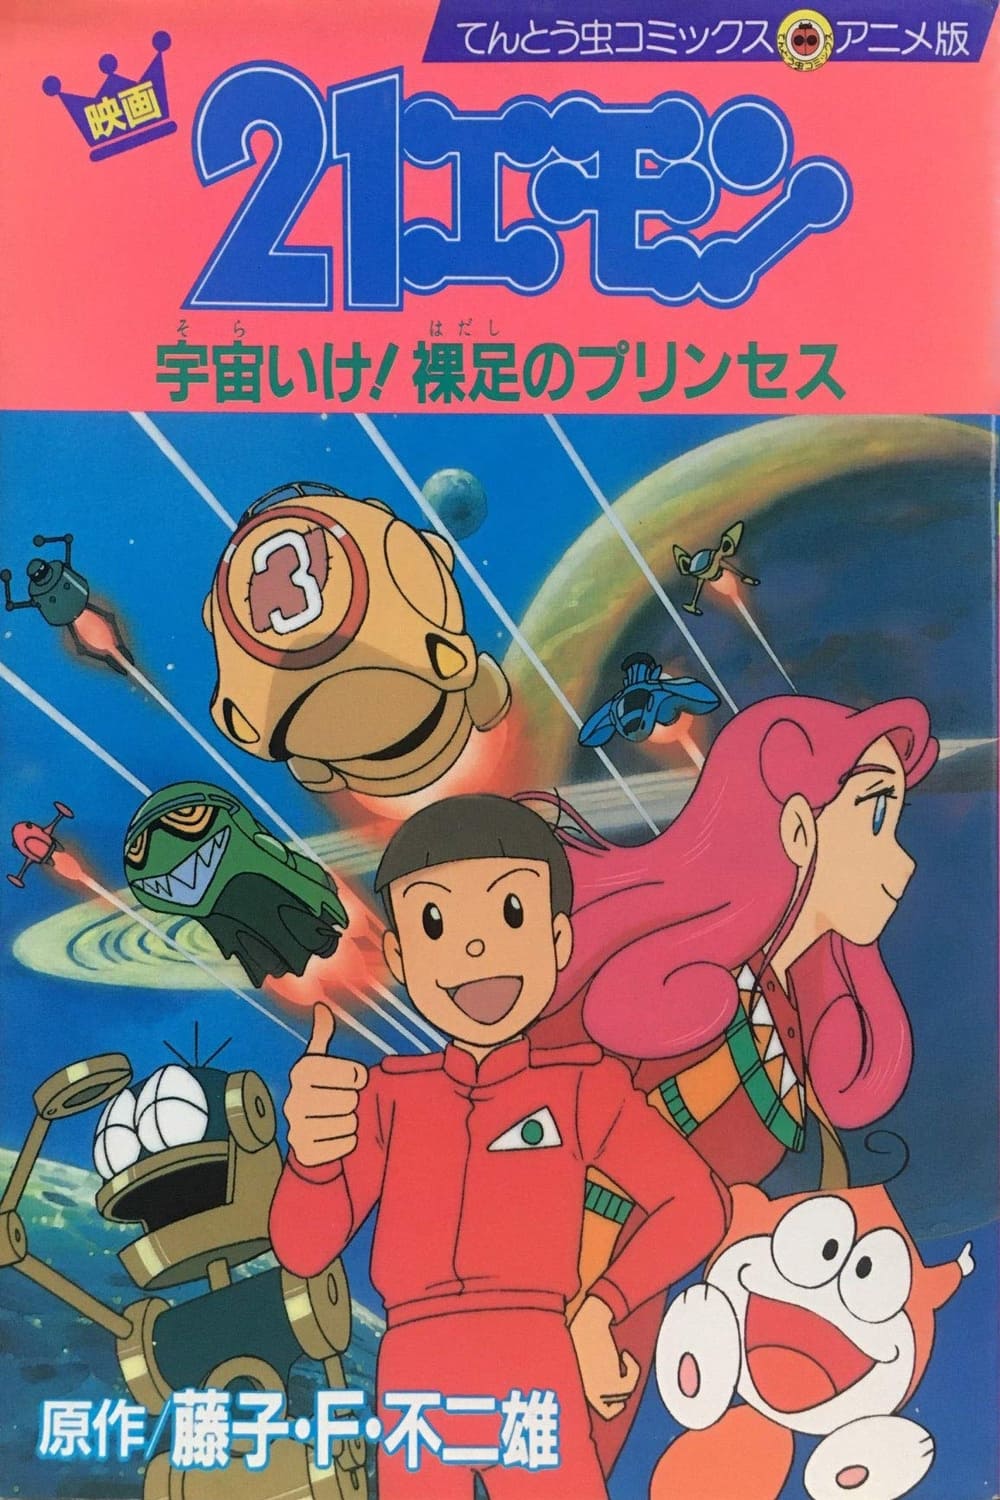 21-Emon: To Space! The Barefoot Princess